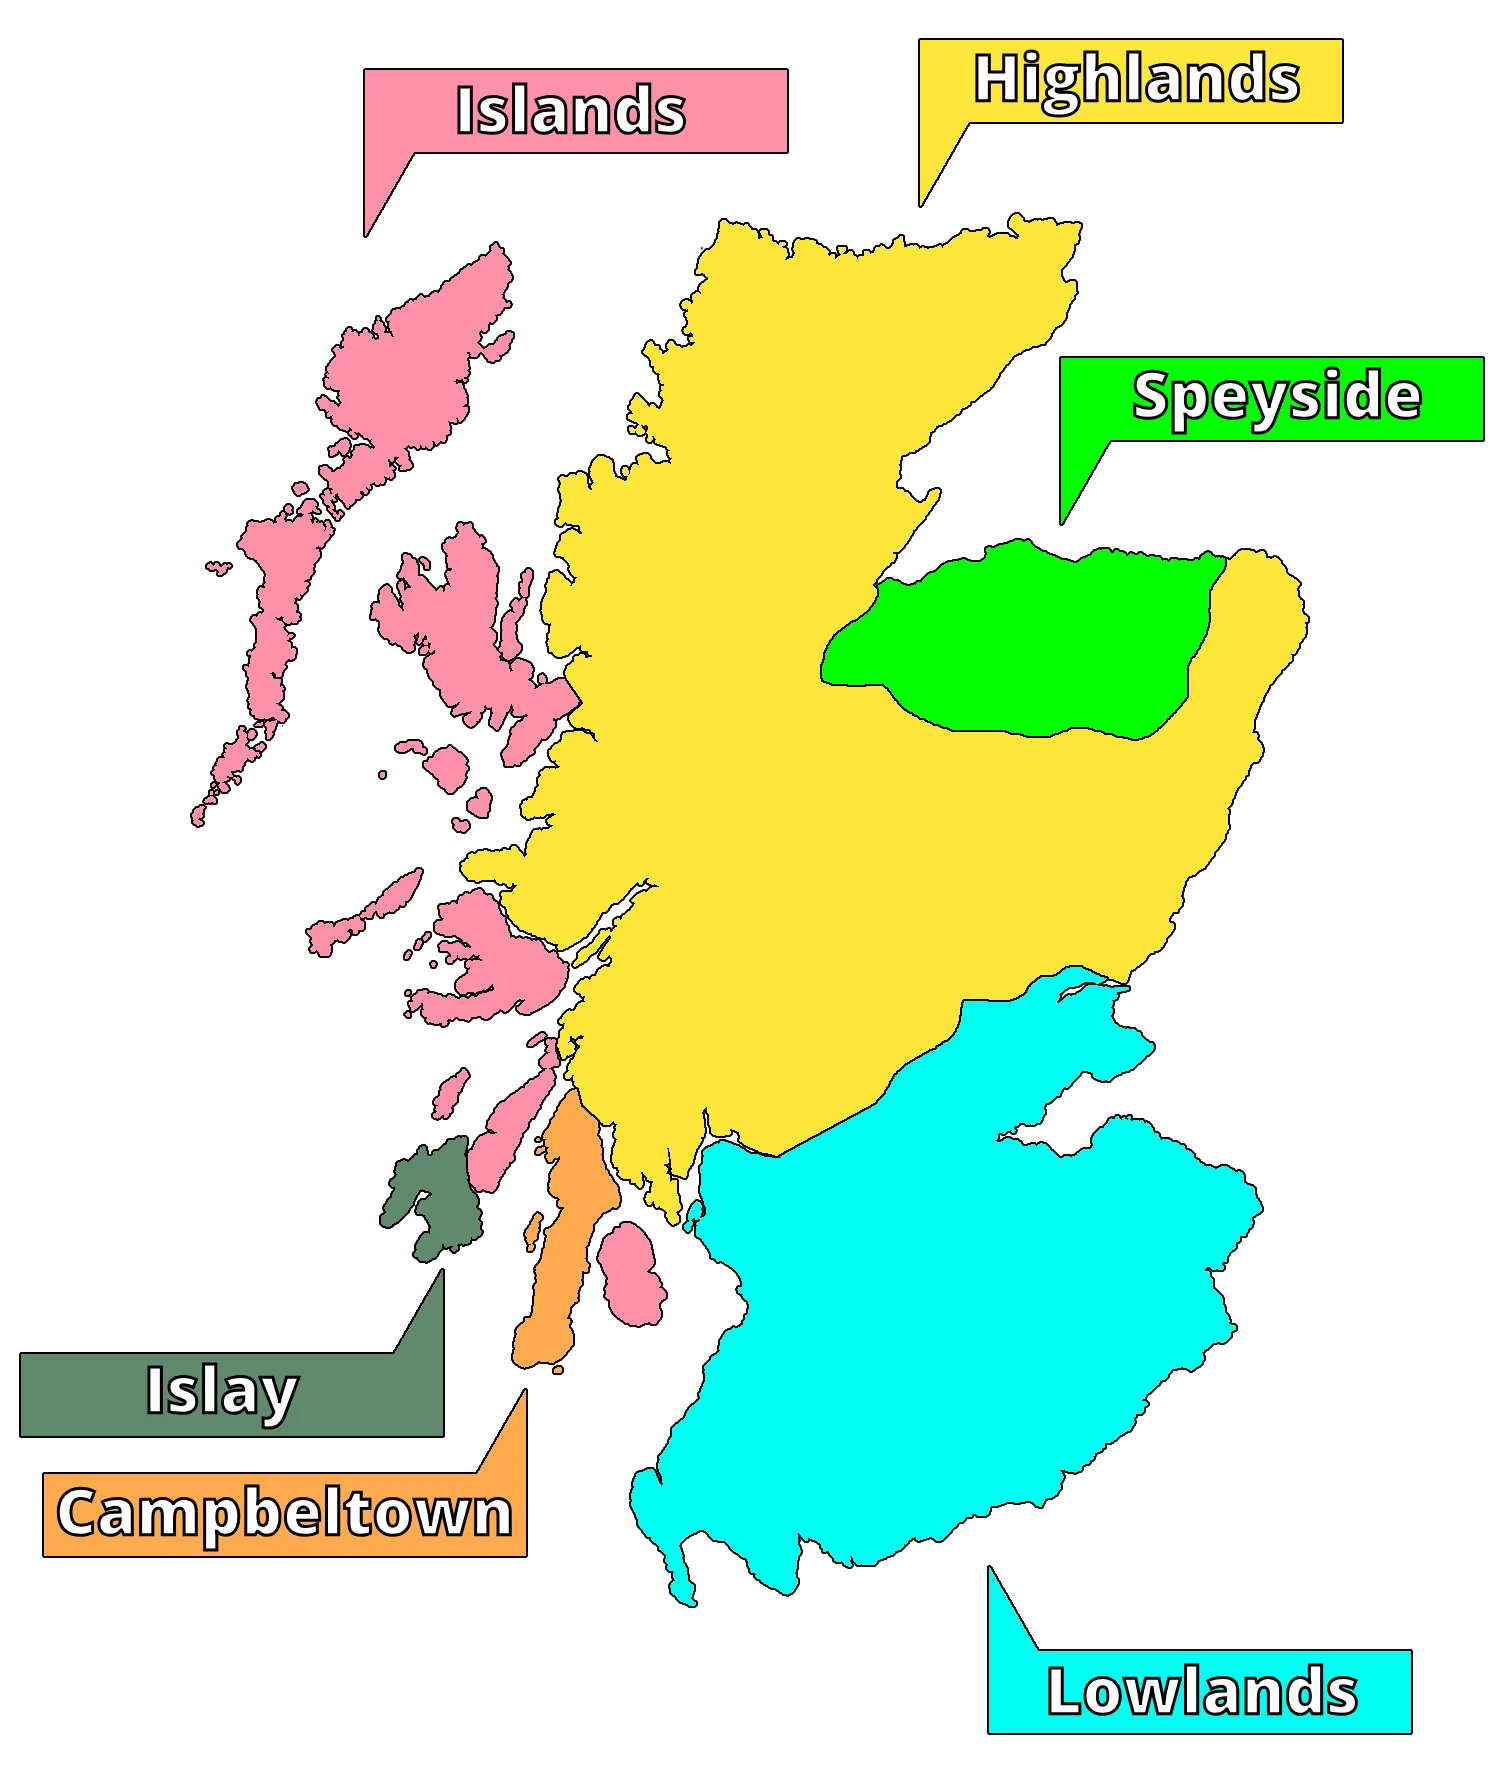 Speyside is located in the northeast of Scotland.